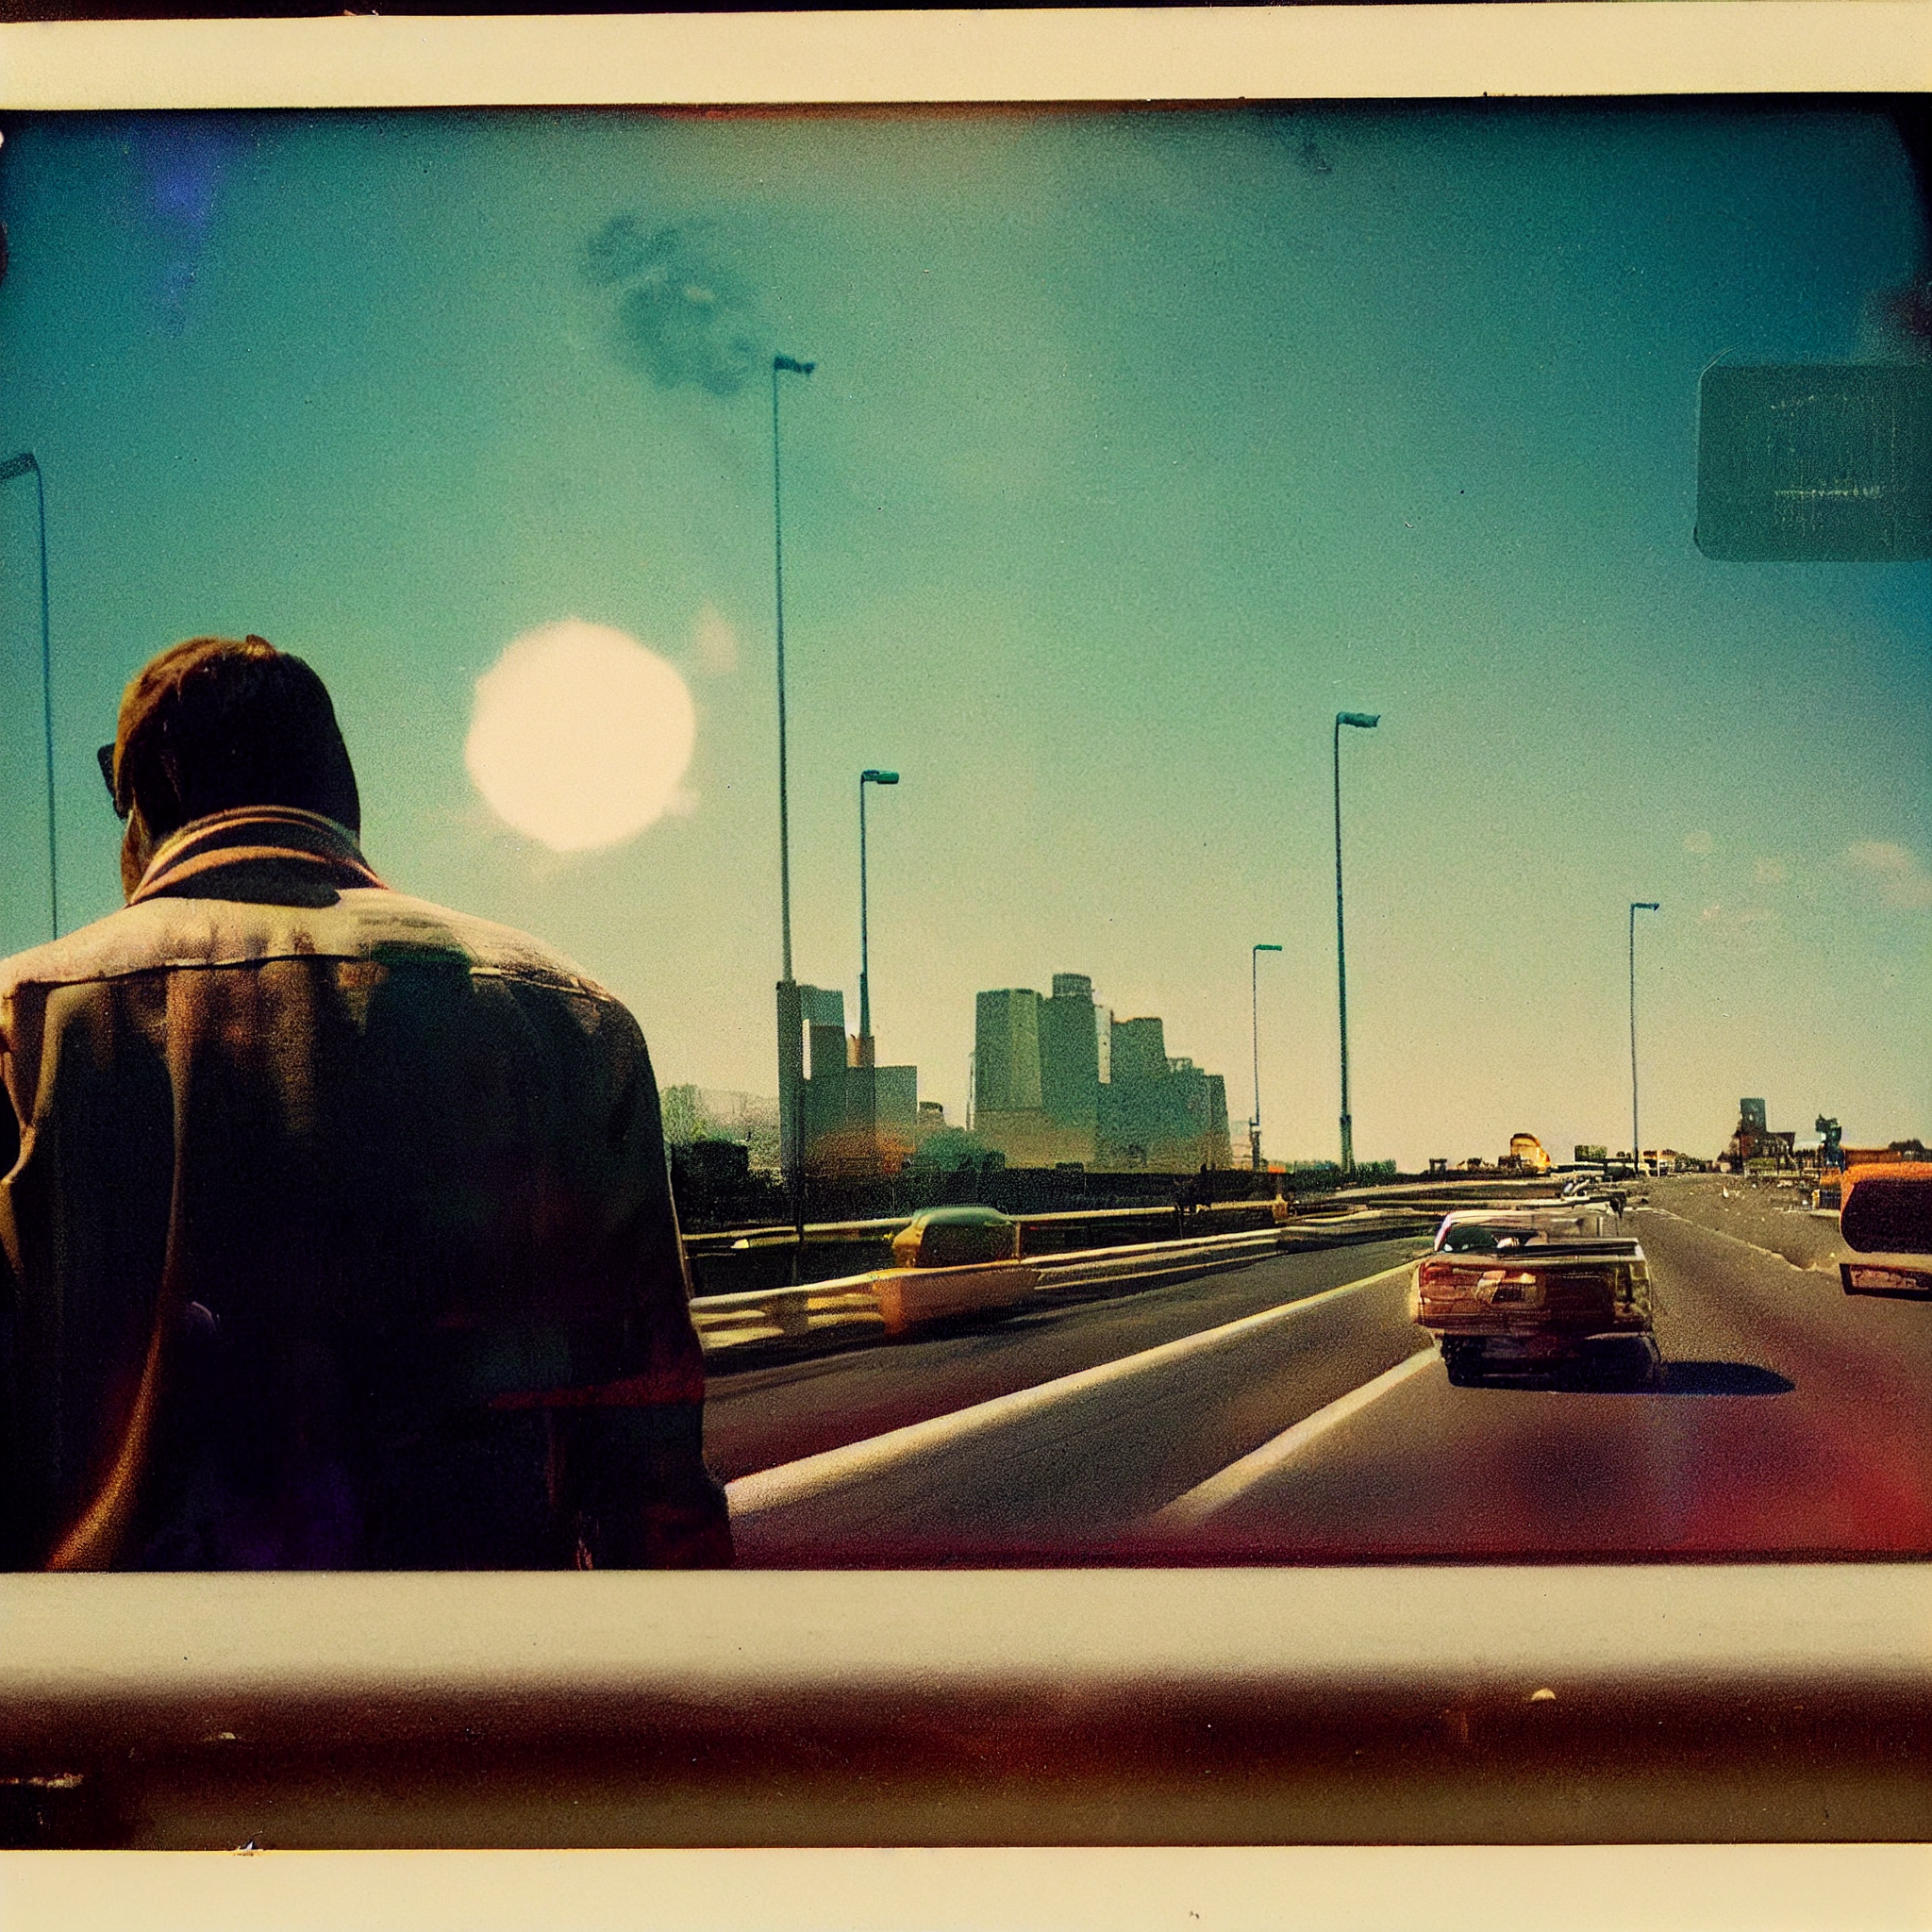 EricdeBroche_A_man_in_the_middle_of_the_motorway_with_cars_goin_7e27dfc9-2c70-4a3b-aba8-613cc486c397.png